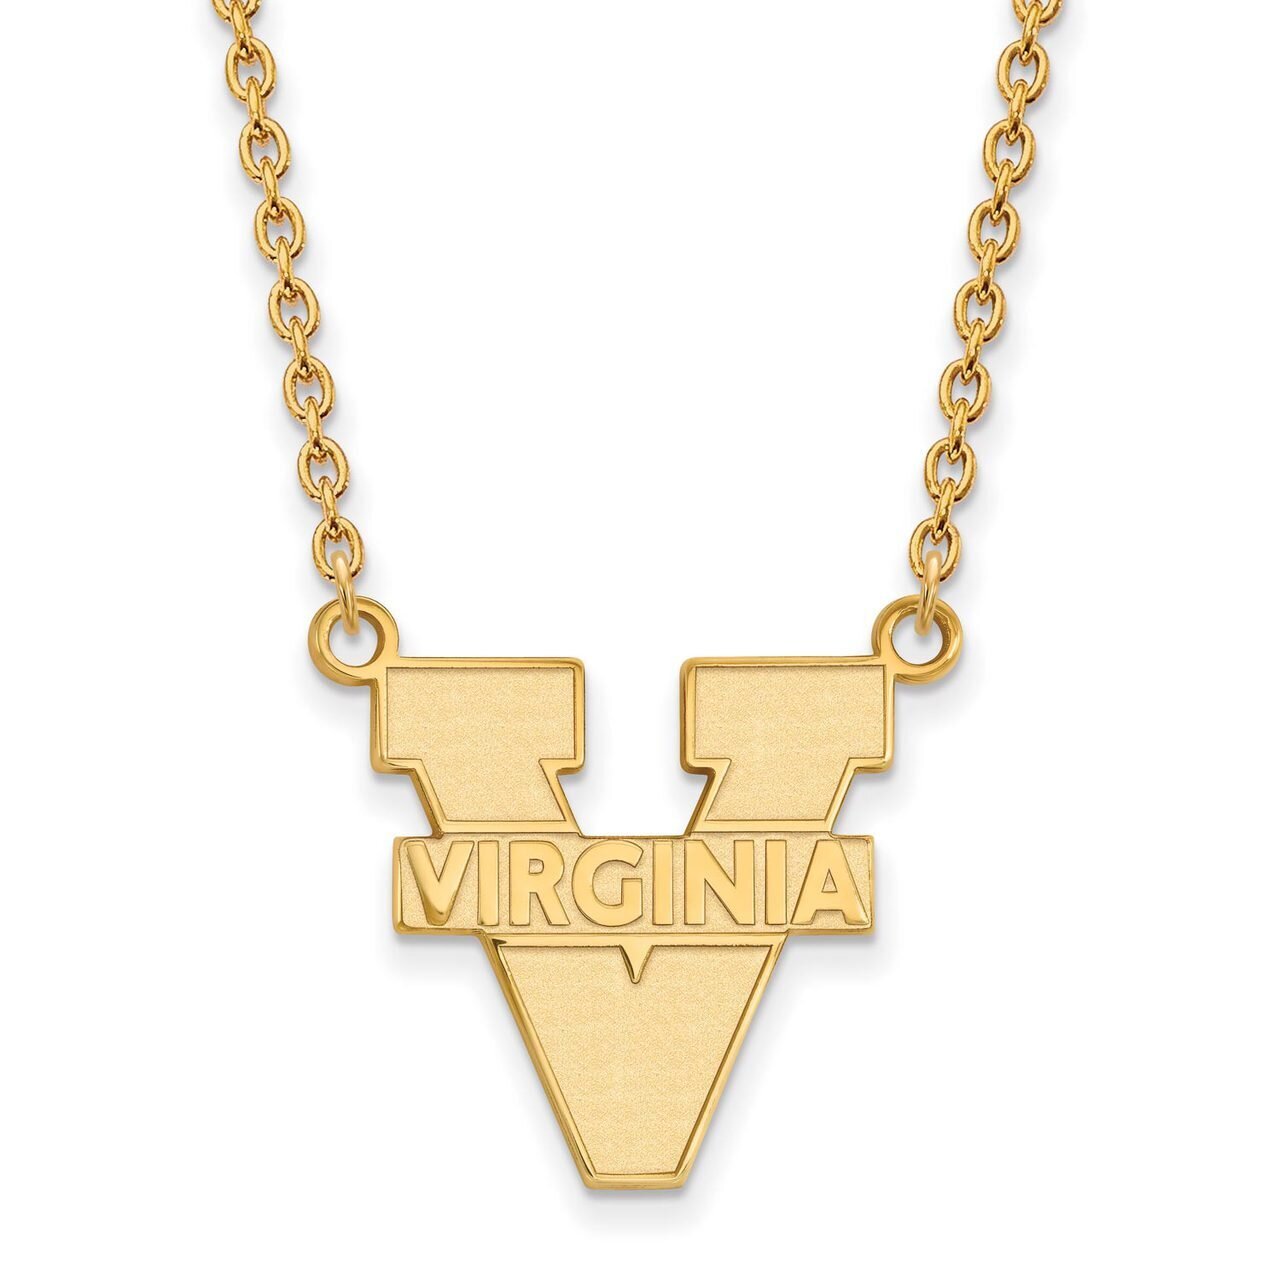 University of Virginia Large Pendant with Chain Necklace 14k Yellow Gold 4Y016UVA-18